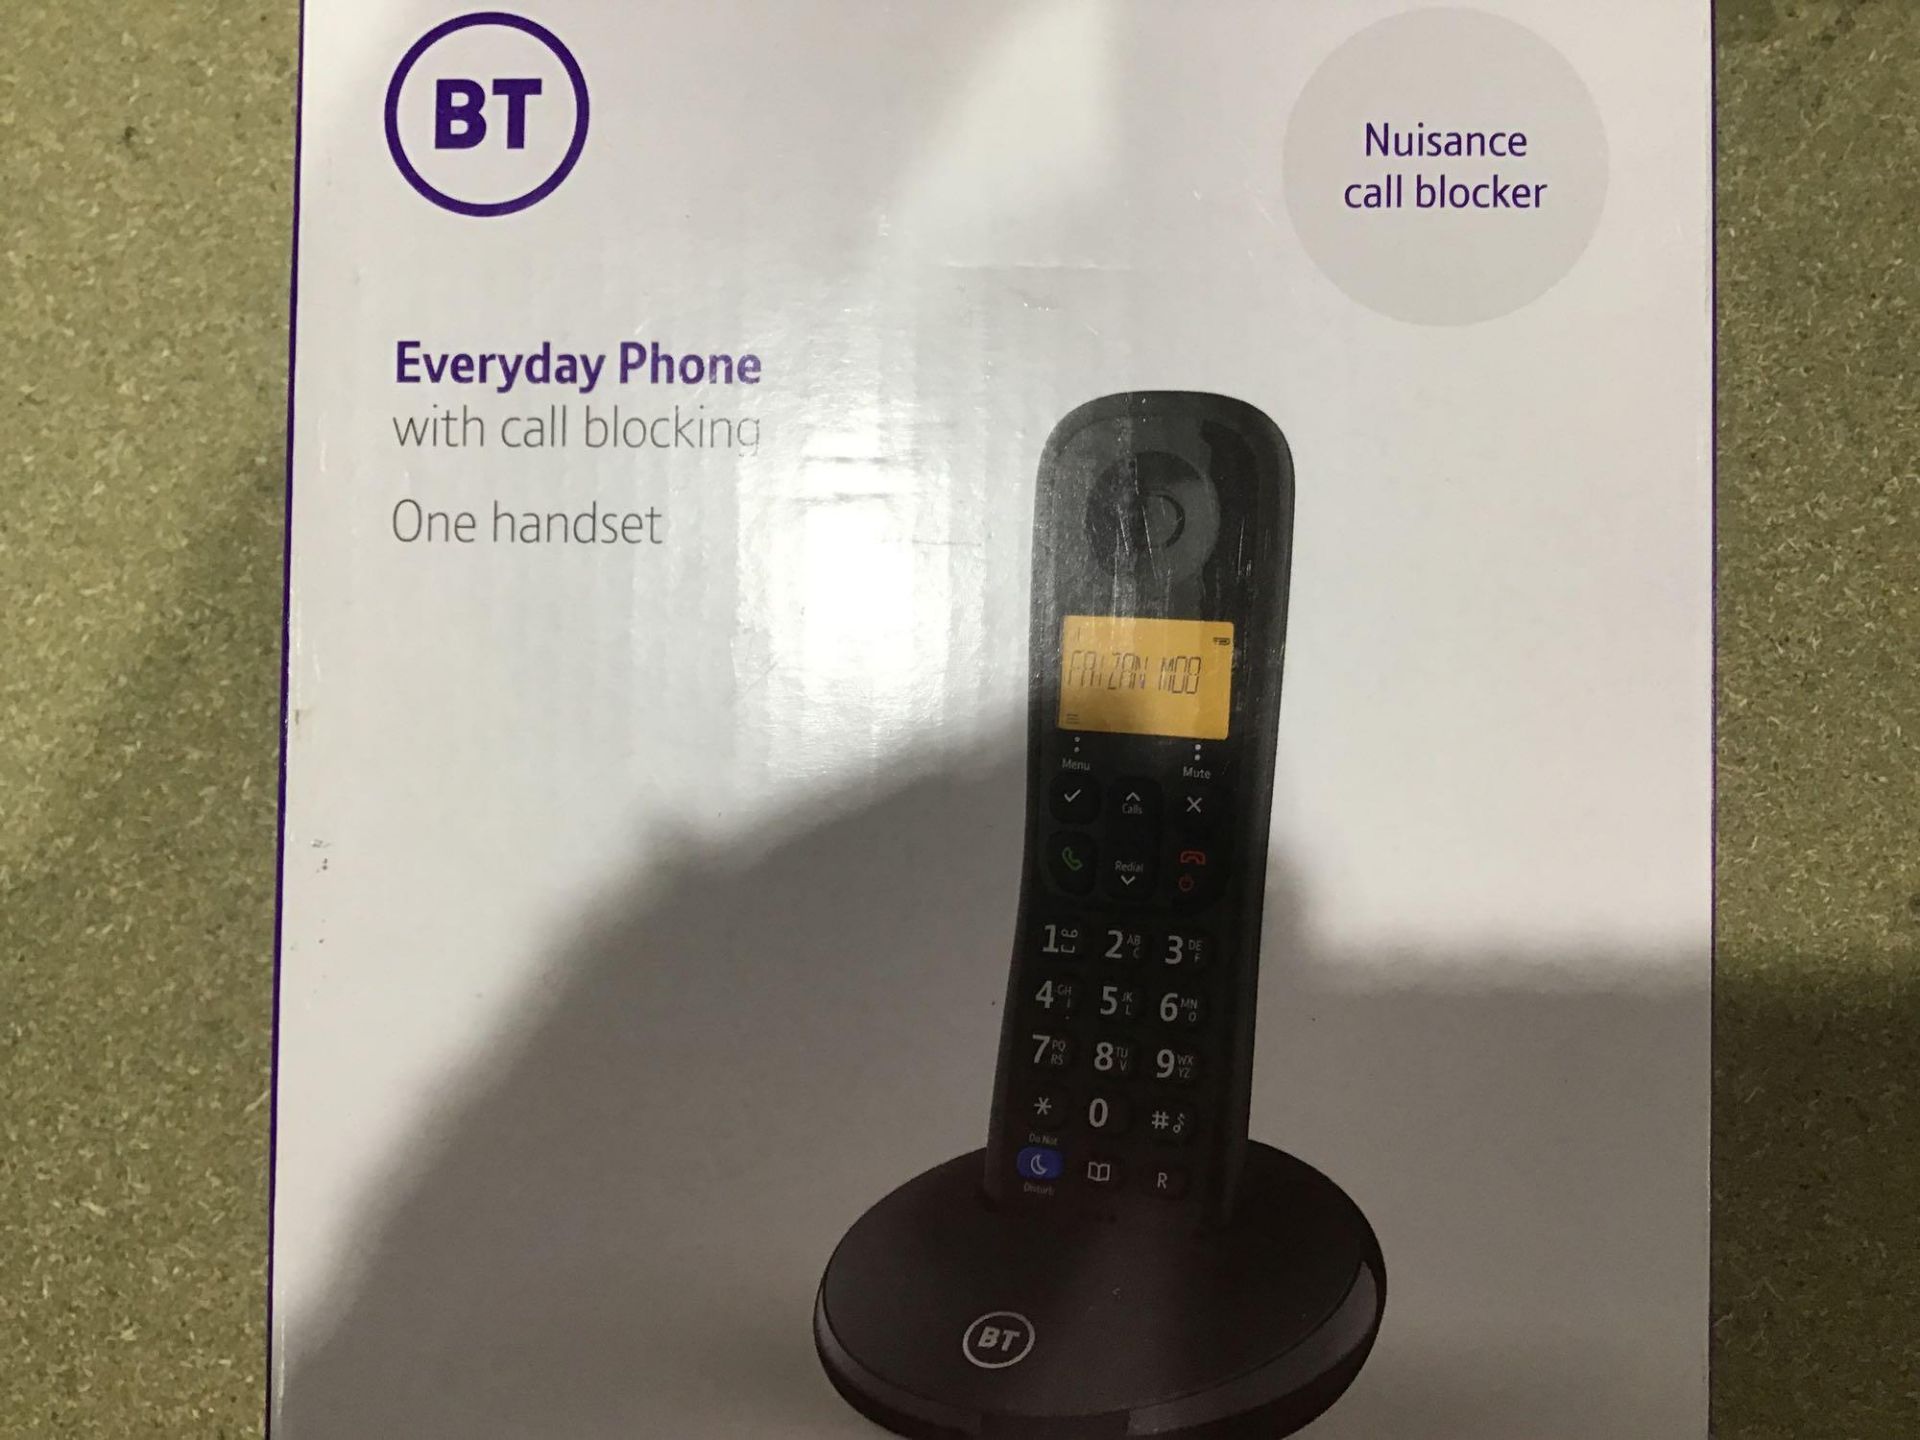 BT Everyday Cordless Home Phone with Basic Call Blocking, Single Handset Pack, Black £19.99 RRP - Image 3 of 4